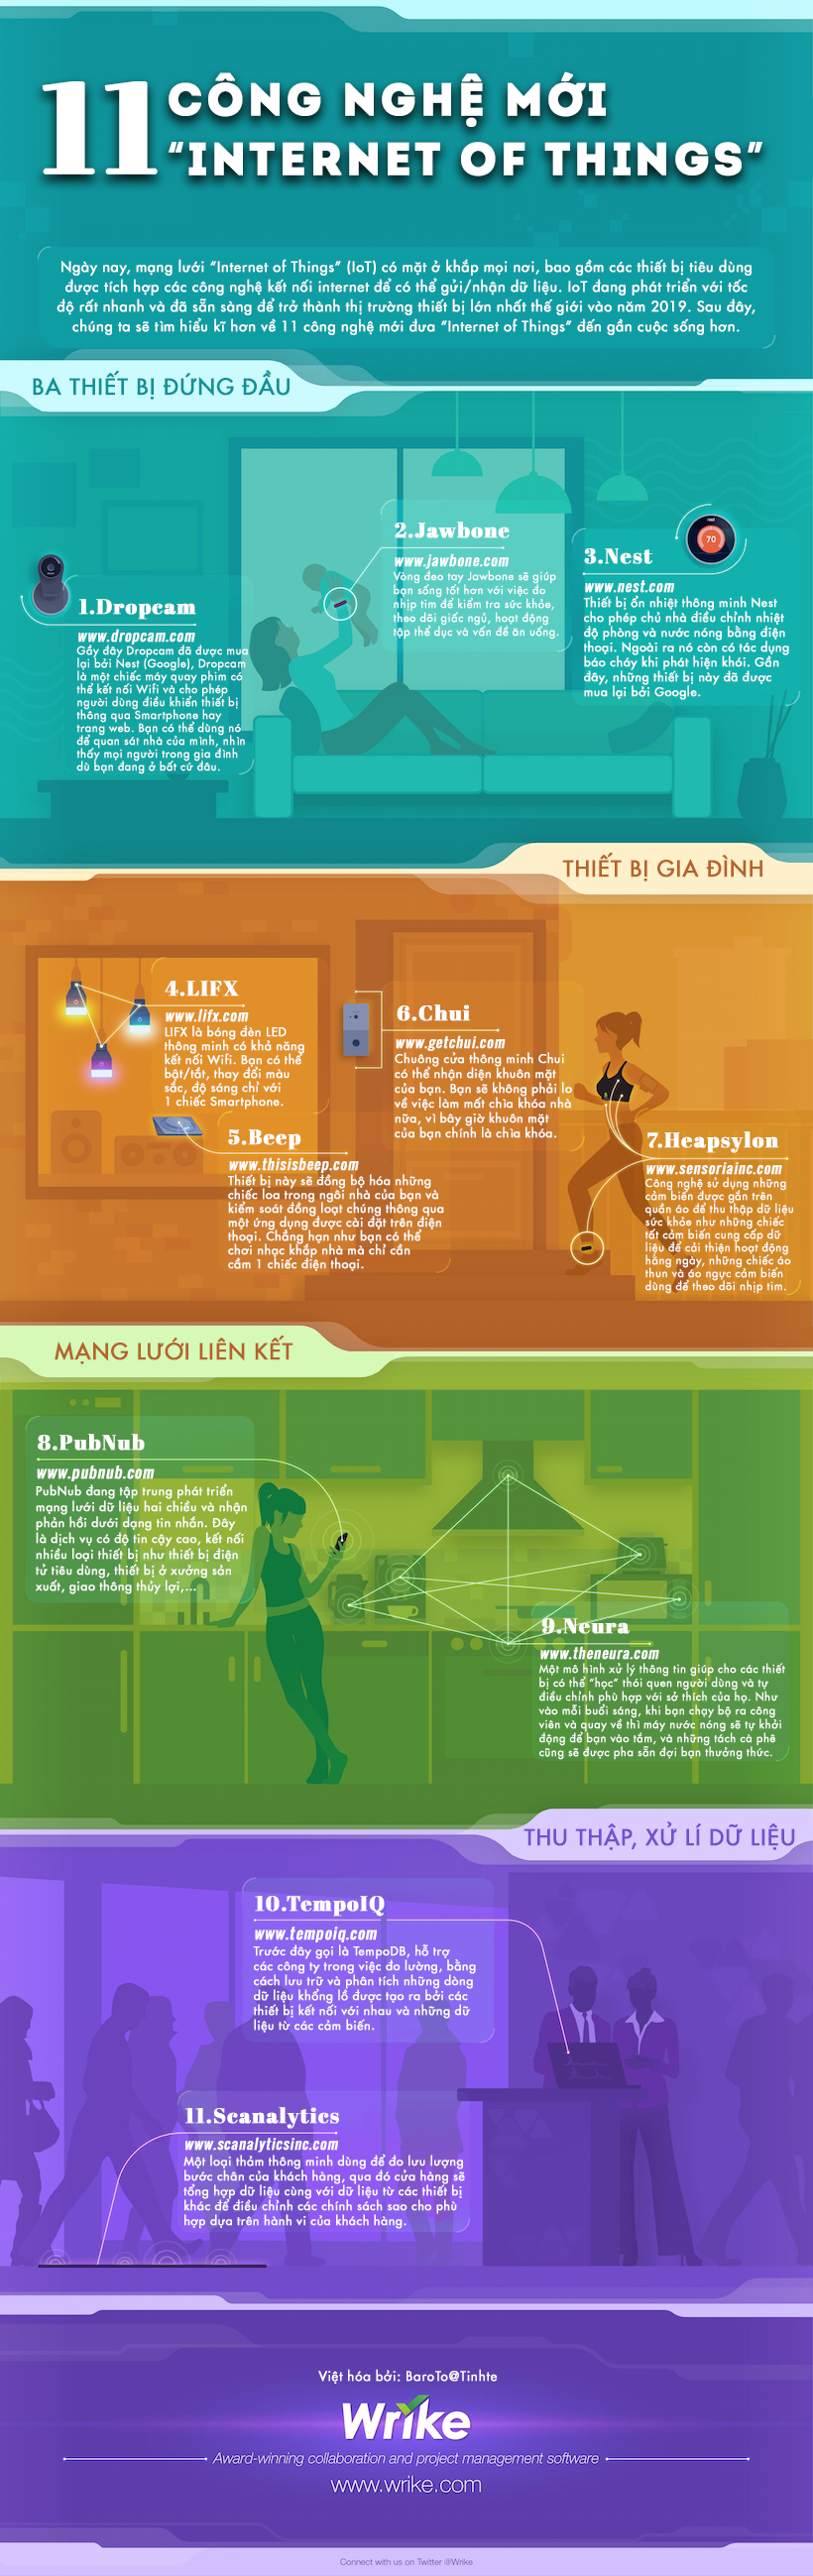 infographic-11-cong-nghe-moi-internet-of-things-1.png